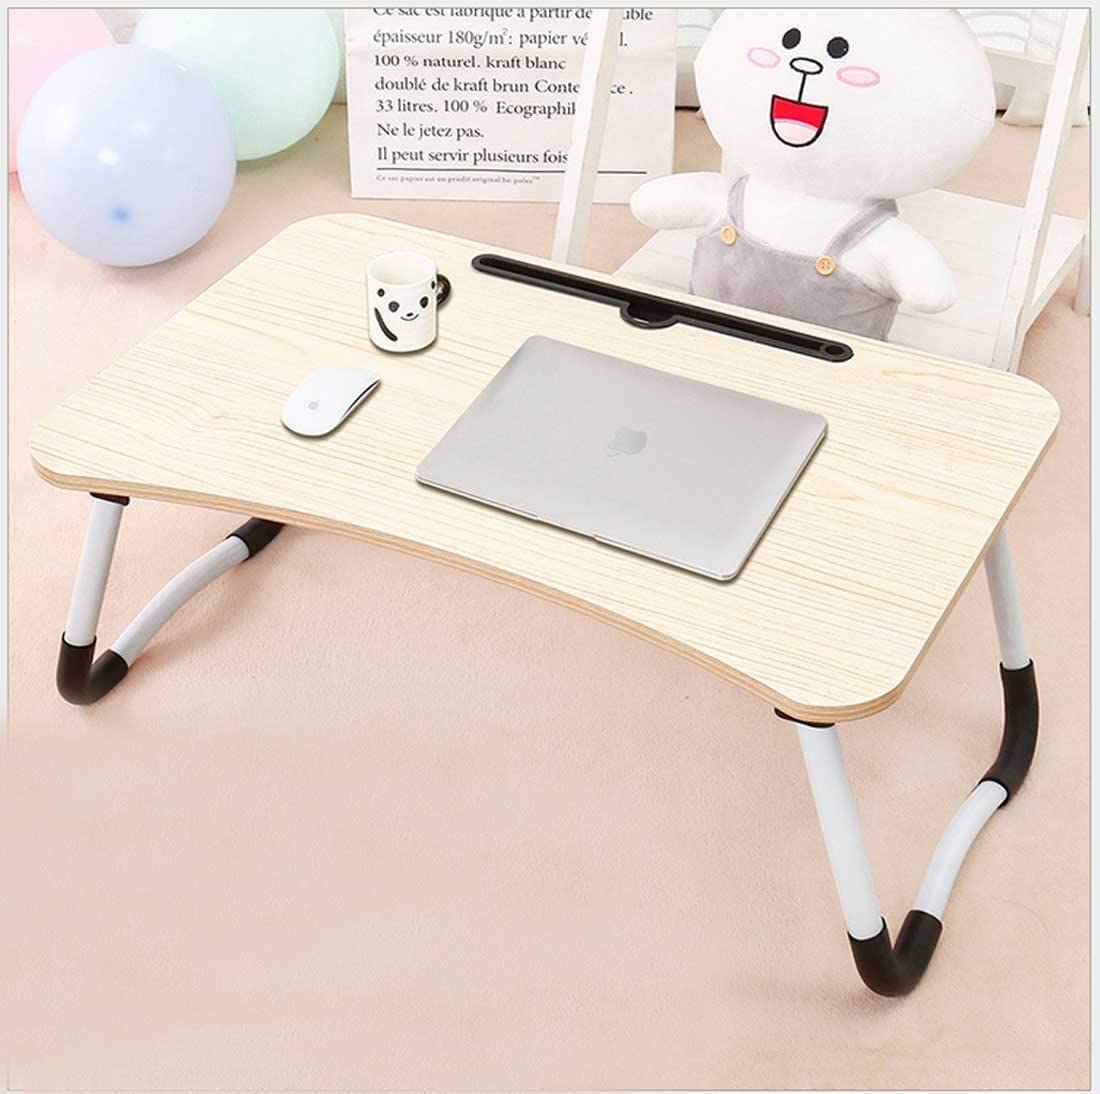 Portable Standing Bed Desk or laptop stand.